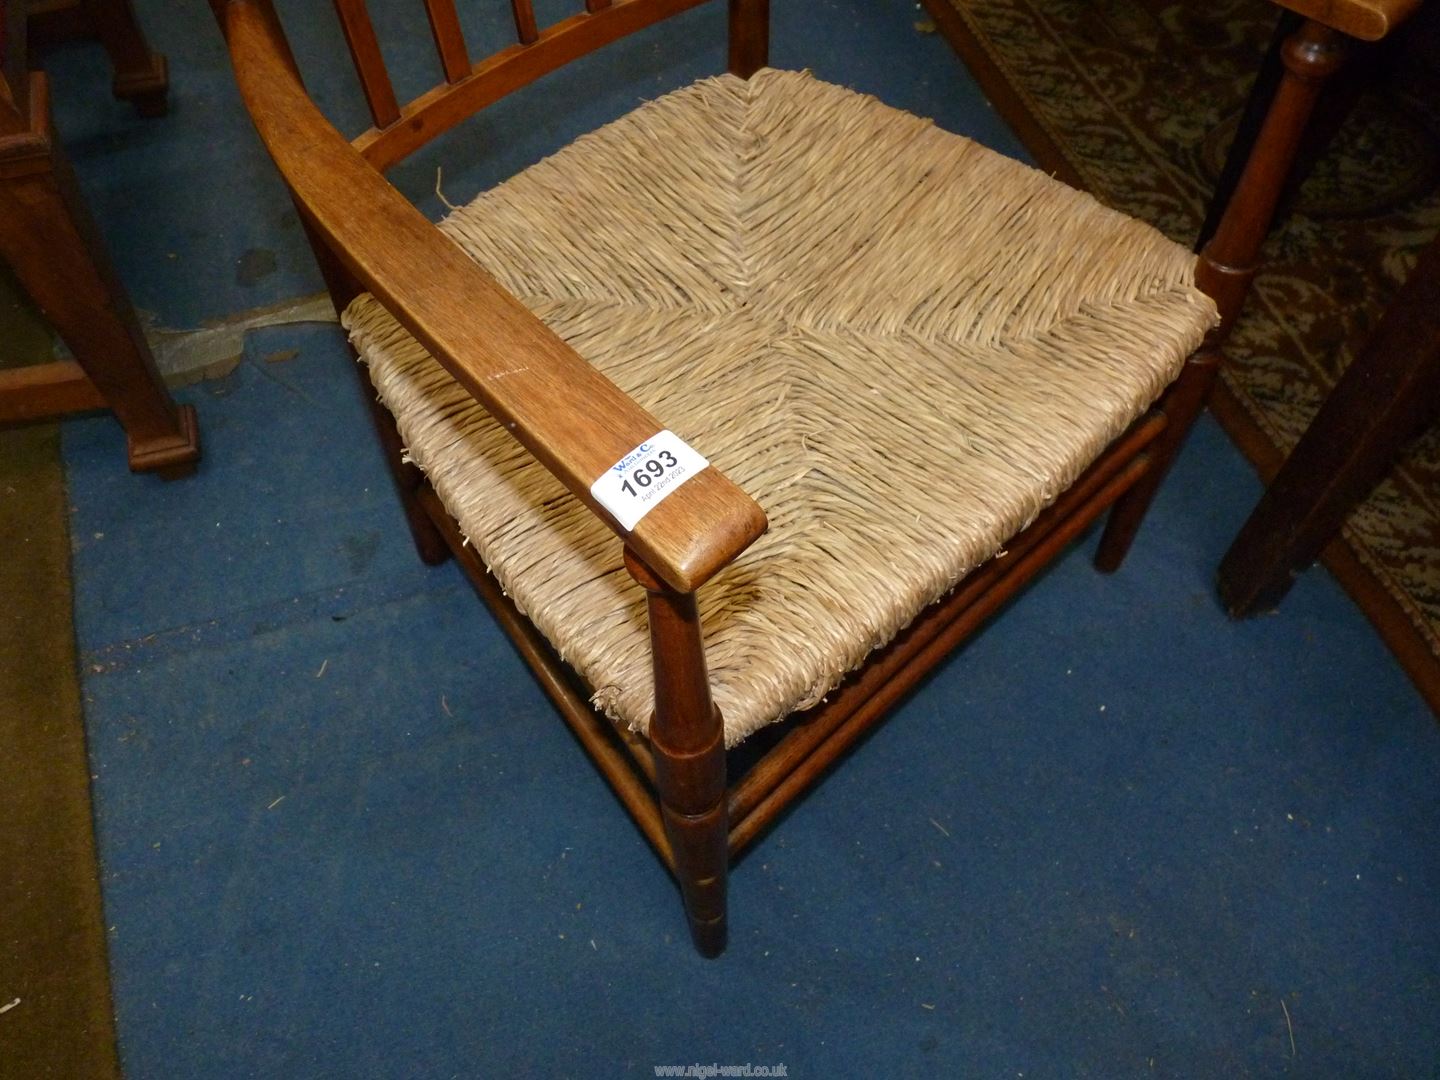 An elegant mixed woods Arts and crafts design open armed Elbow Chair having a fretworked central - Image 4 of 4